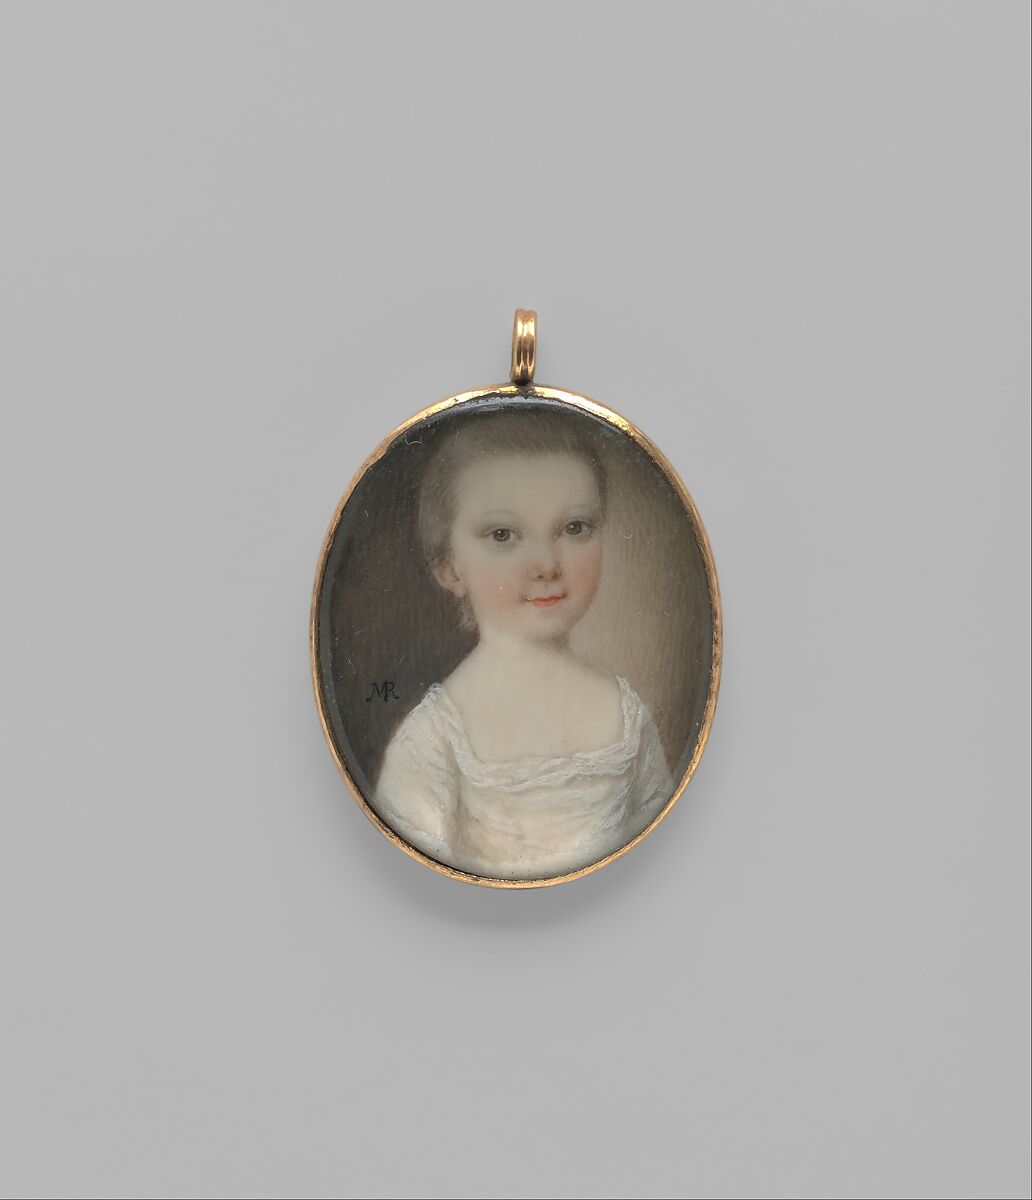 Hester Middleton, Mary Roberts (died 1761 Charleston, South Carolina), Watercolor on ivory, American 